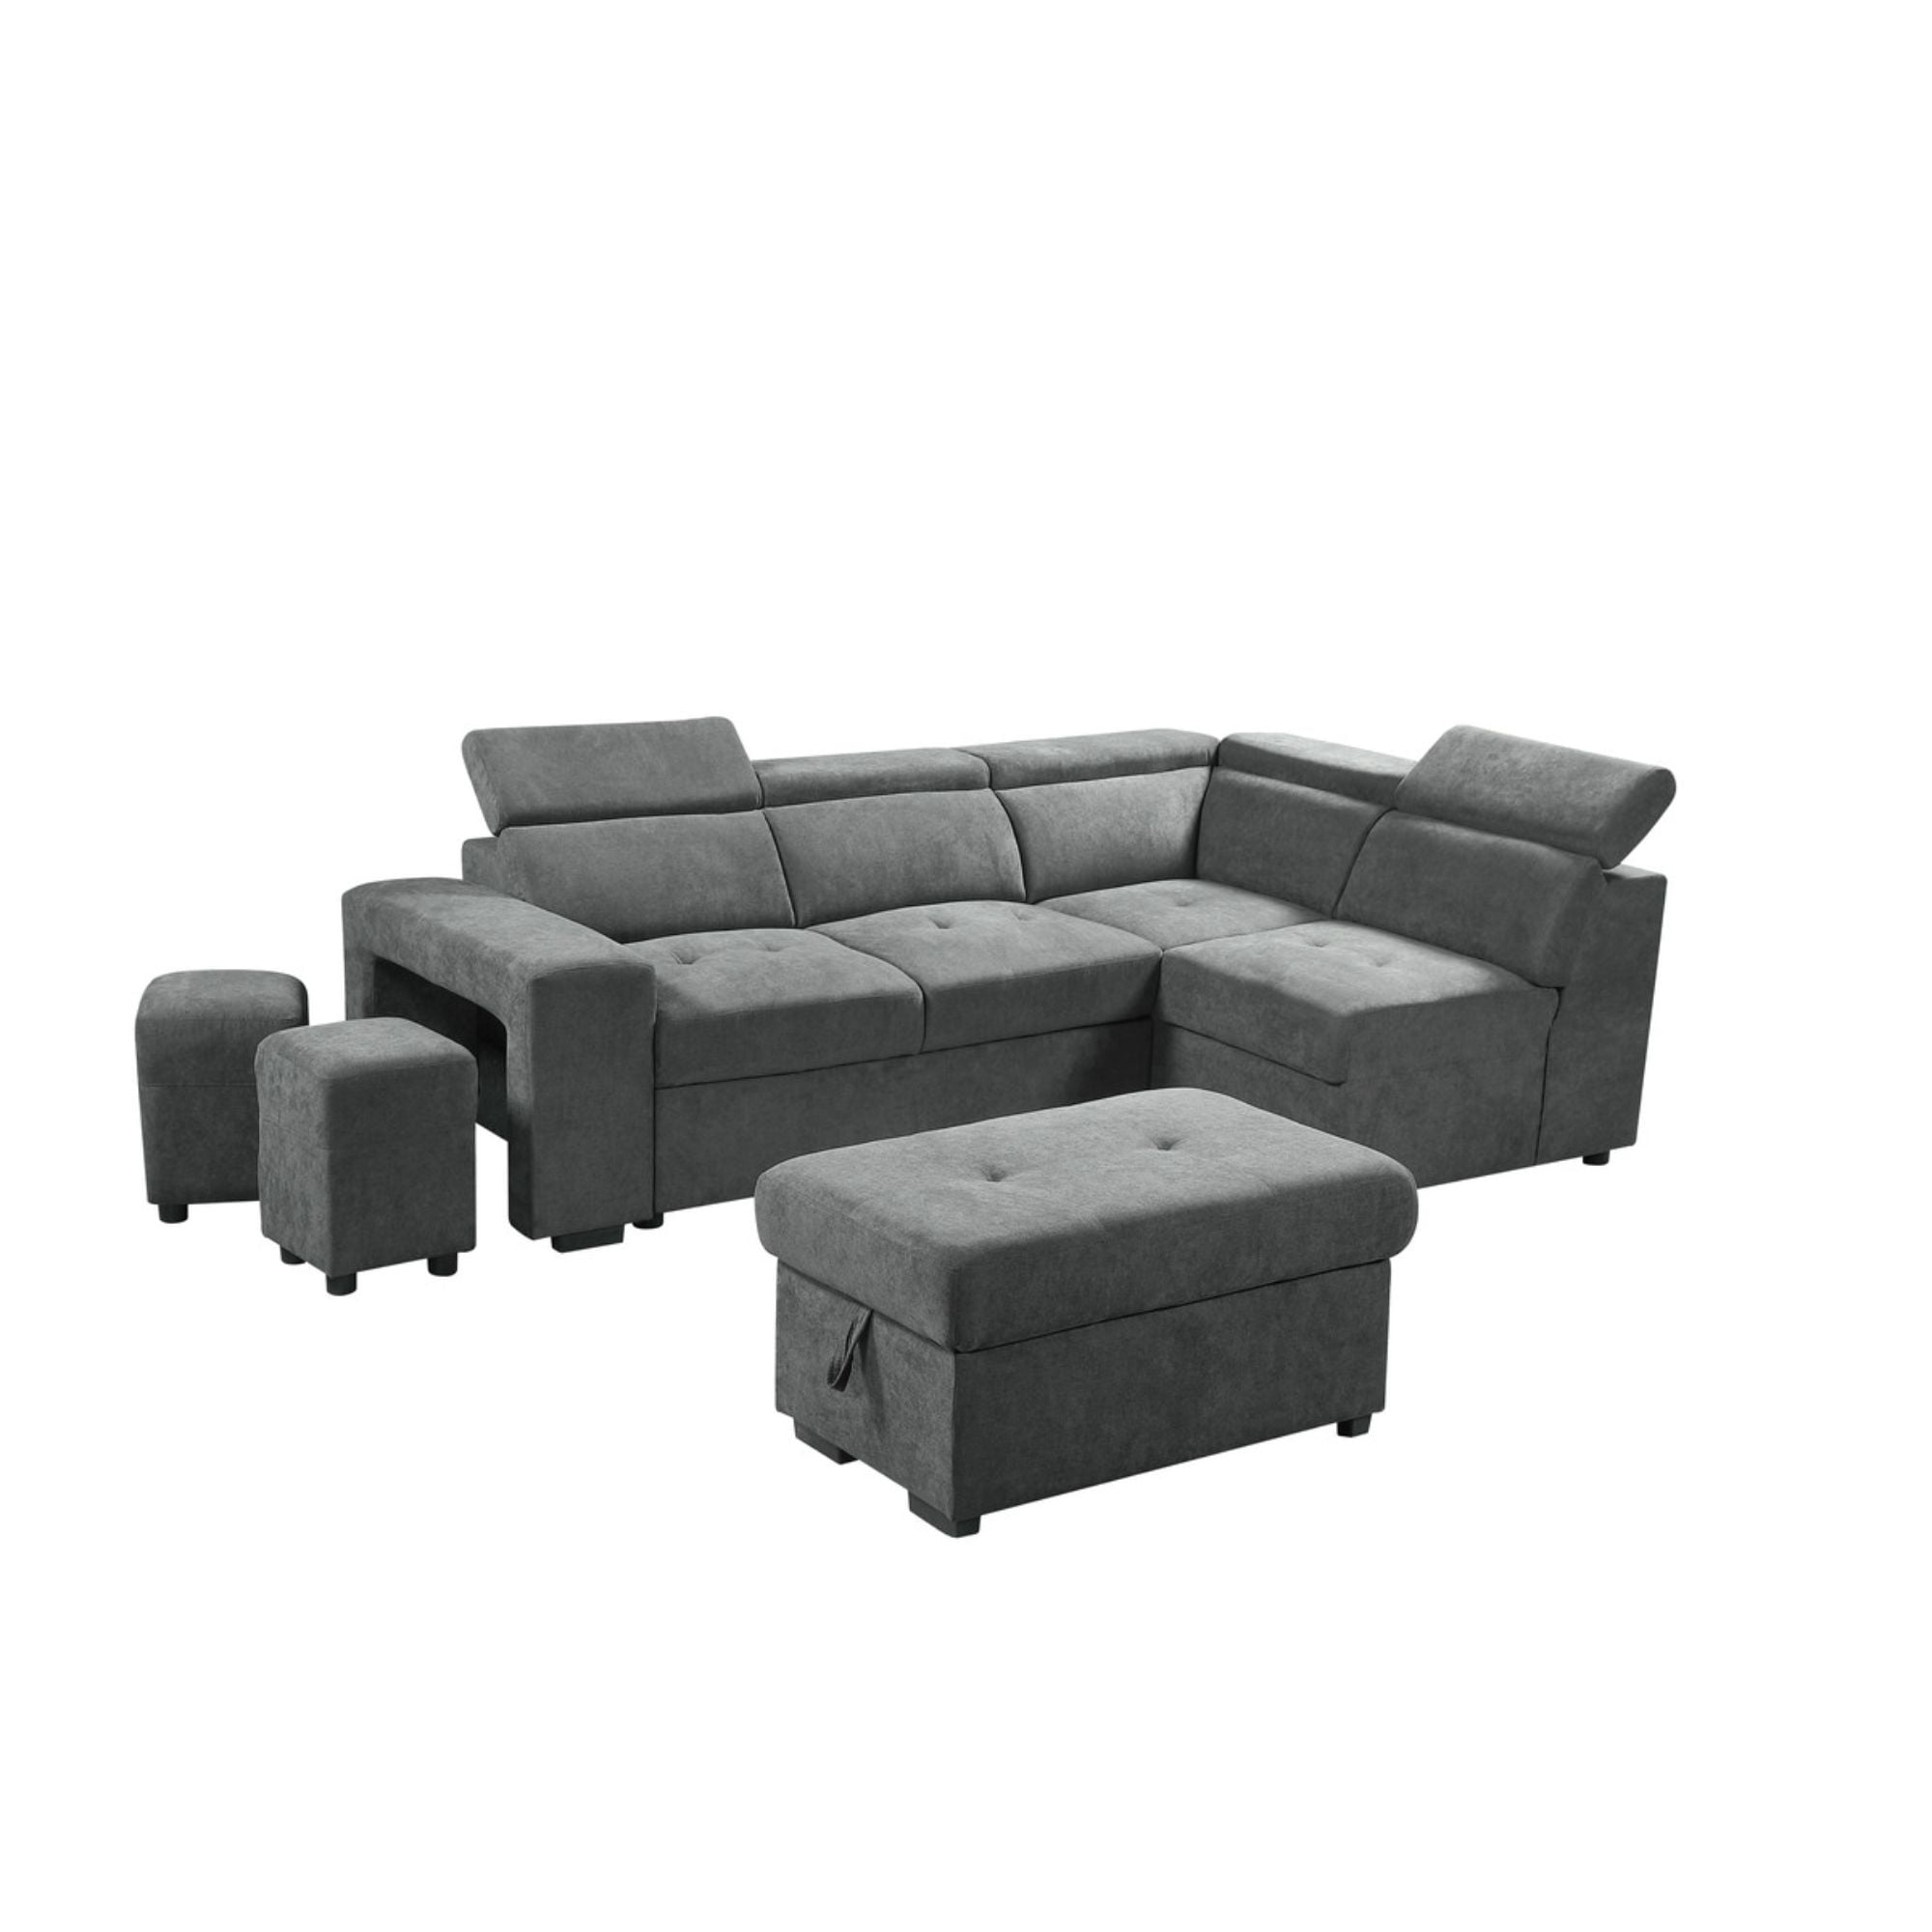 Set of 4 Pewter Gray Henrik Sleeper Sectional Sofa with Storage Ottoman and 2 Stools, 8'